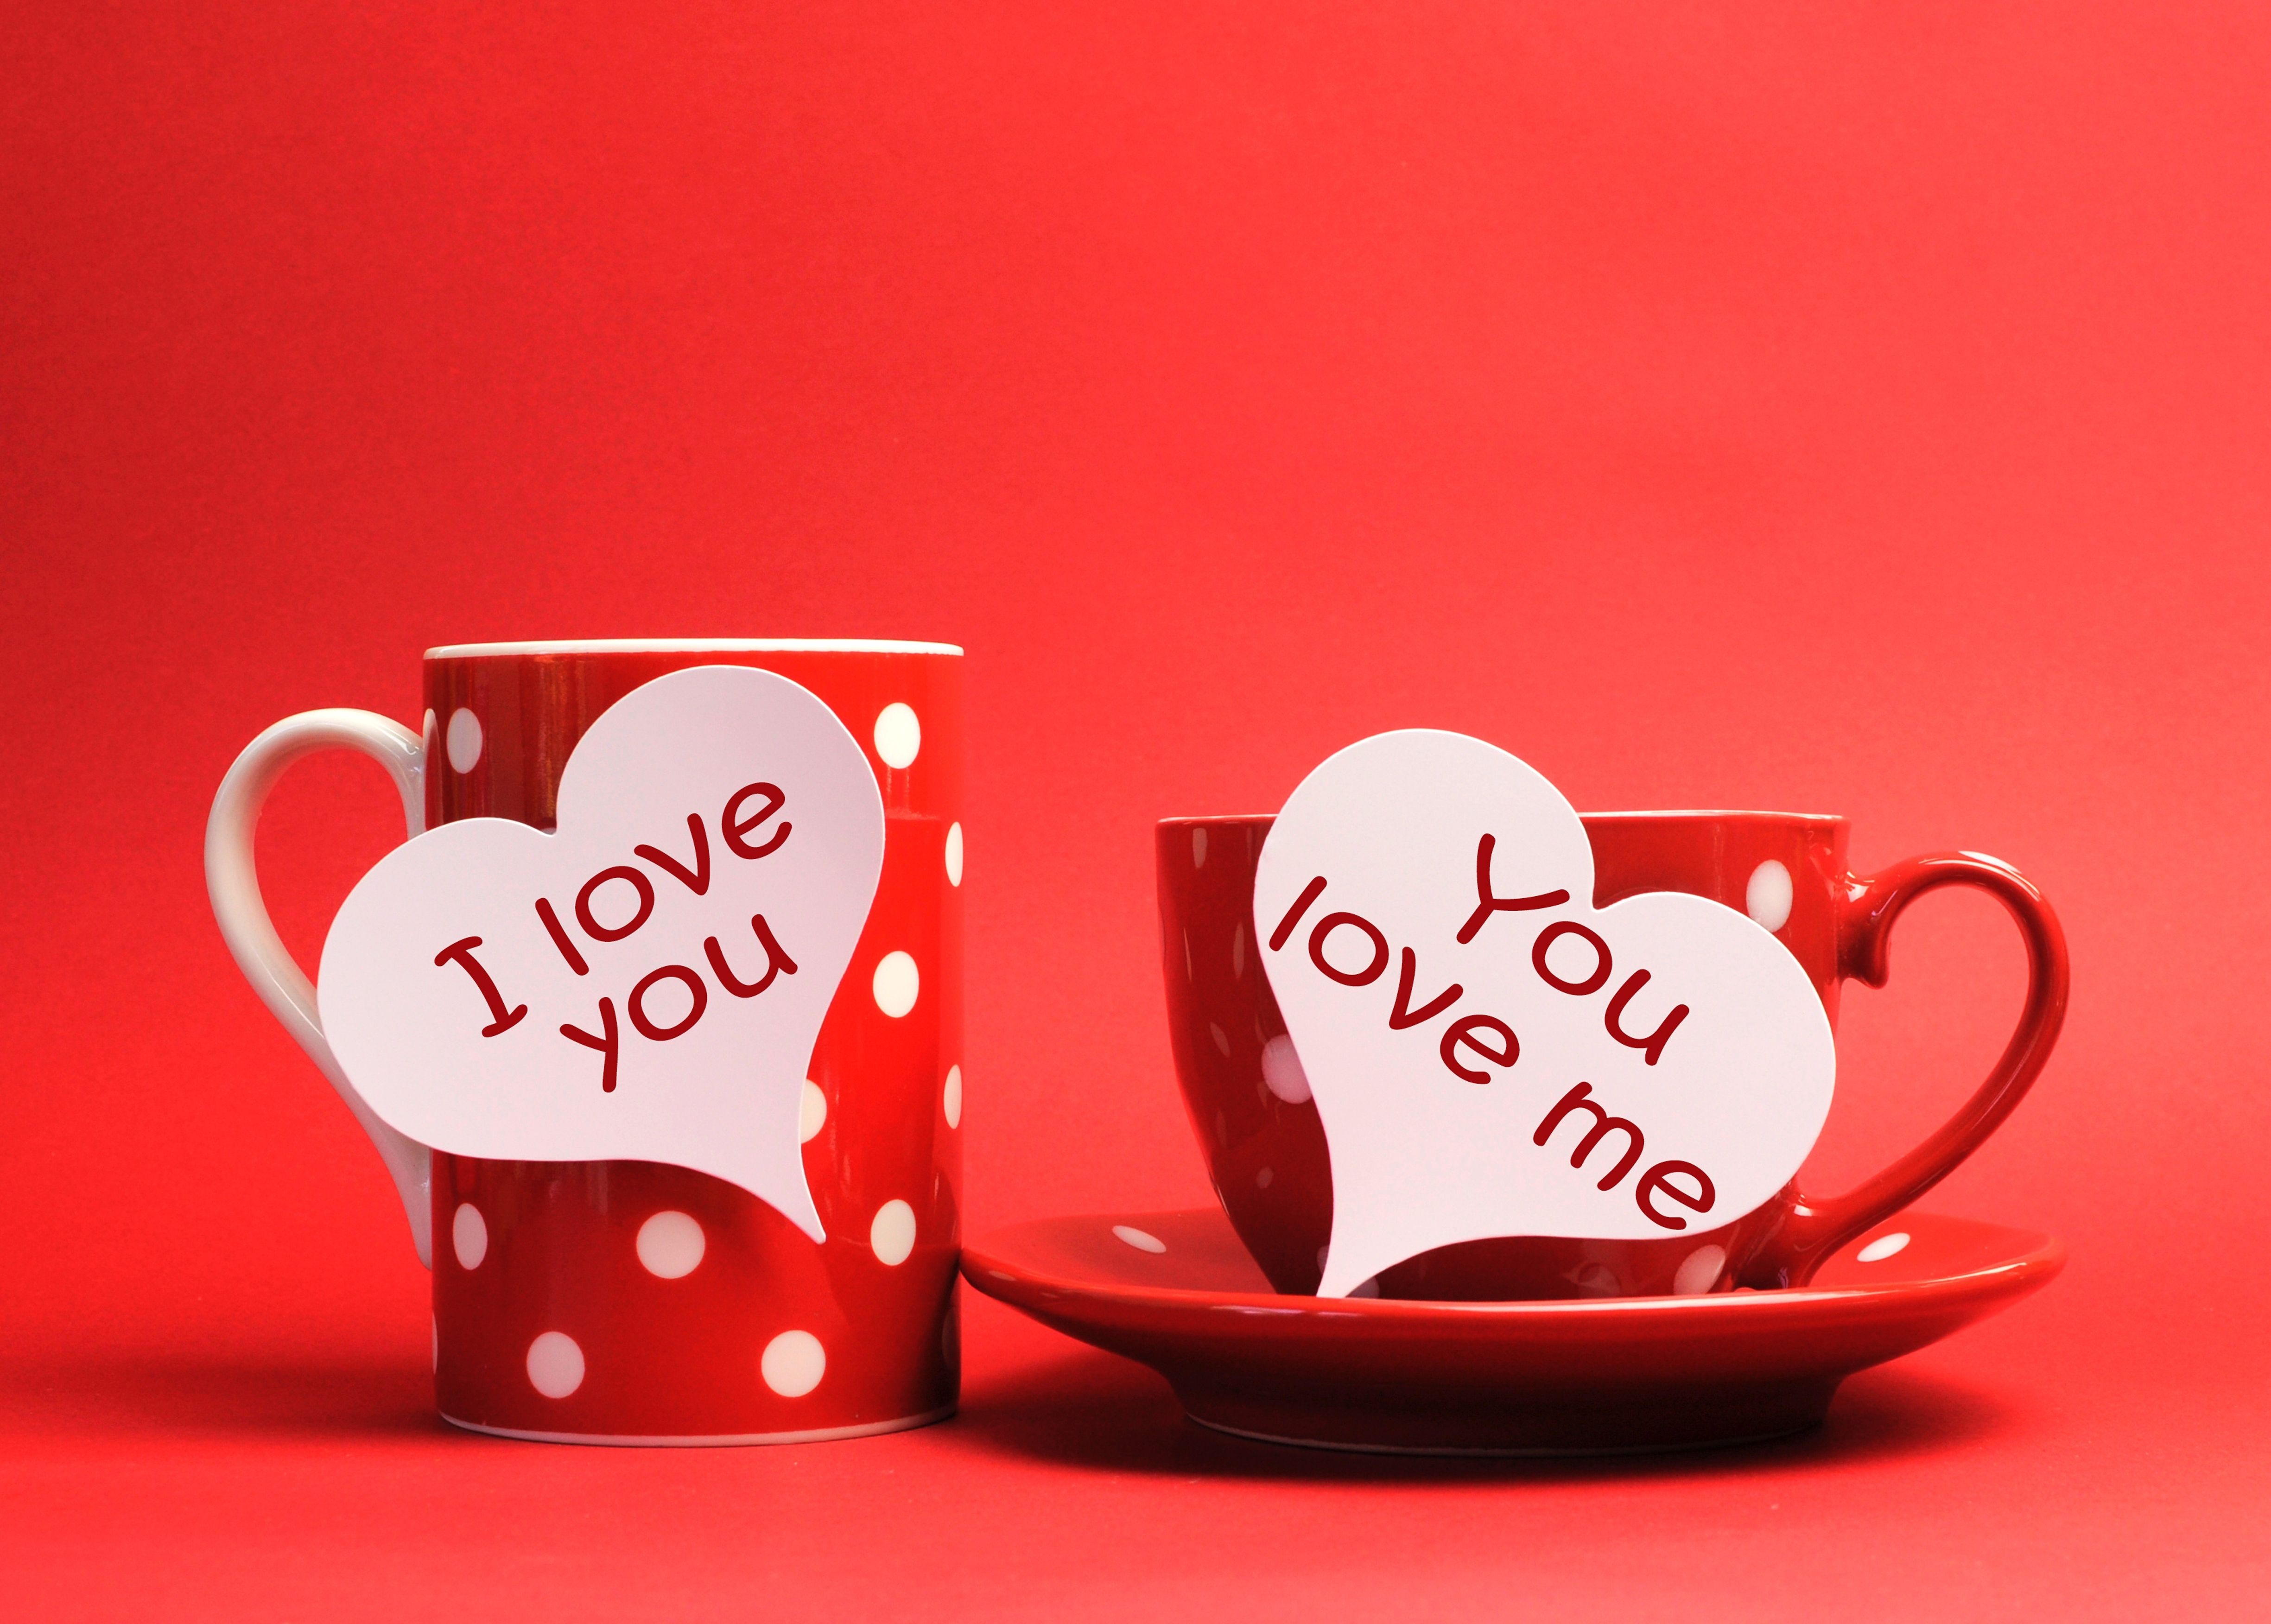 I Love You HD Wallpapers Free Download 